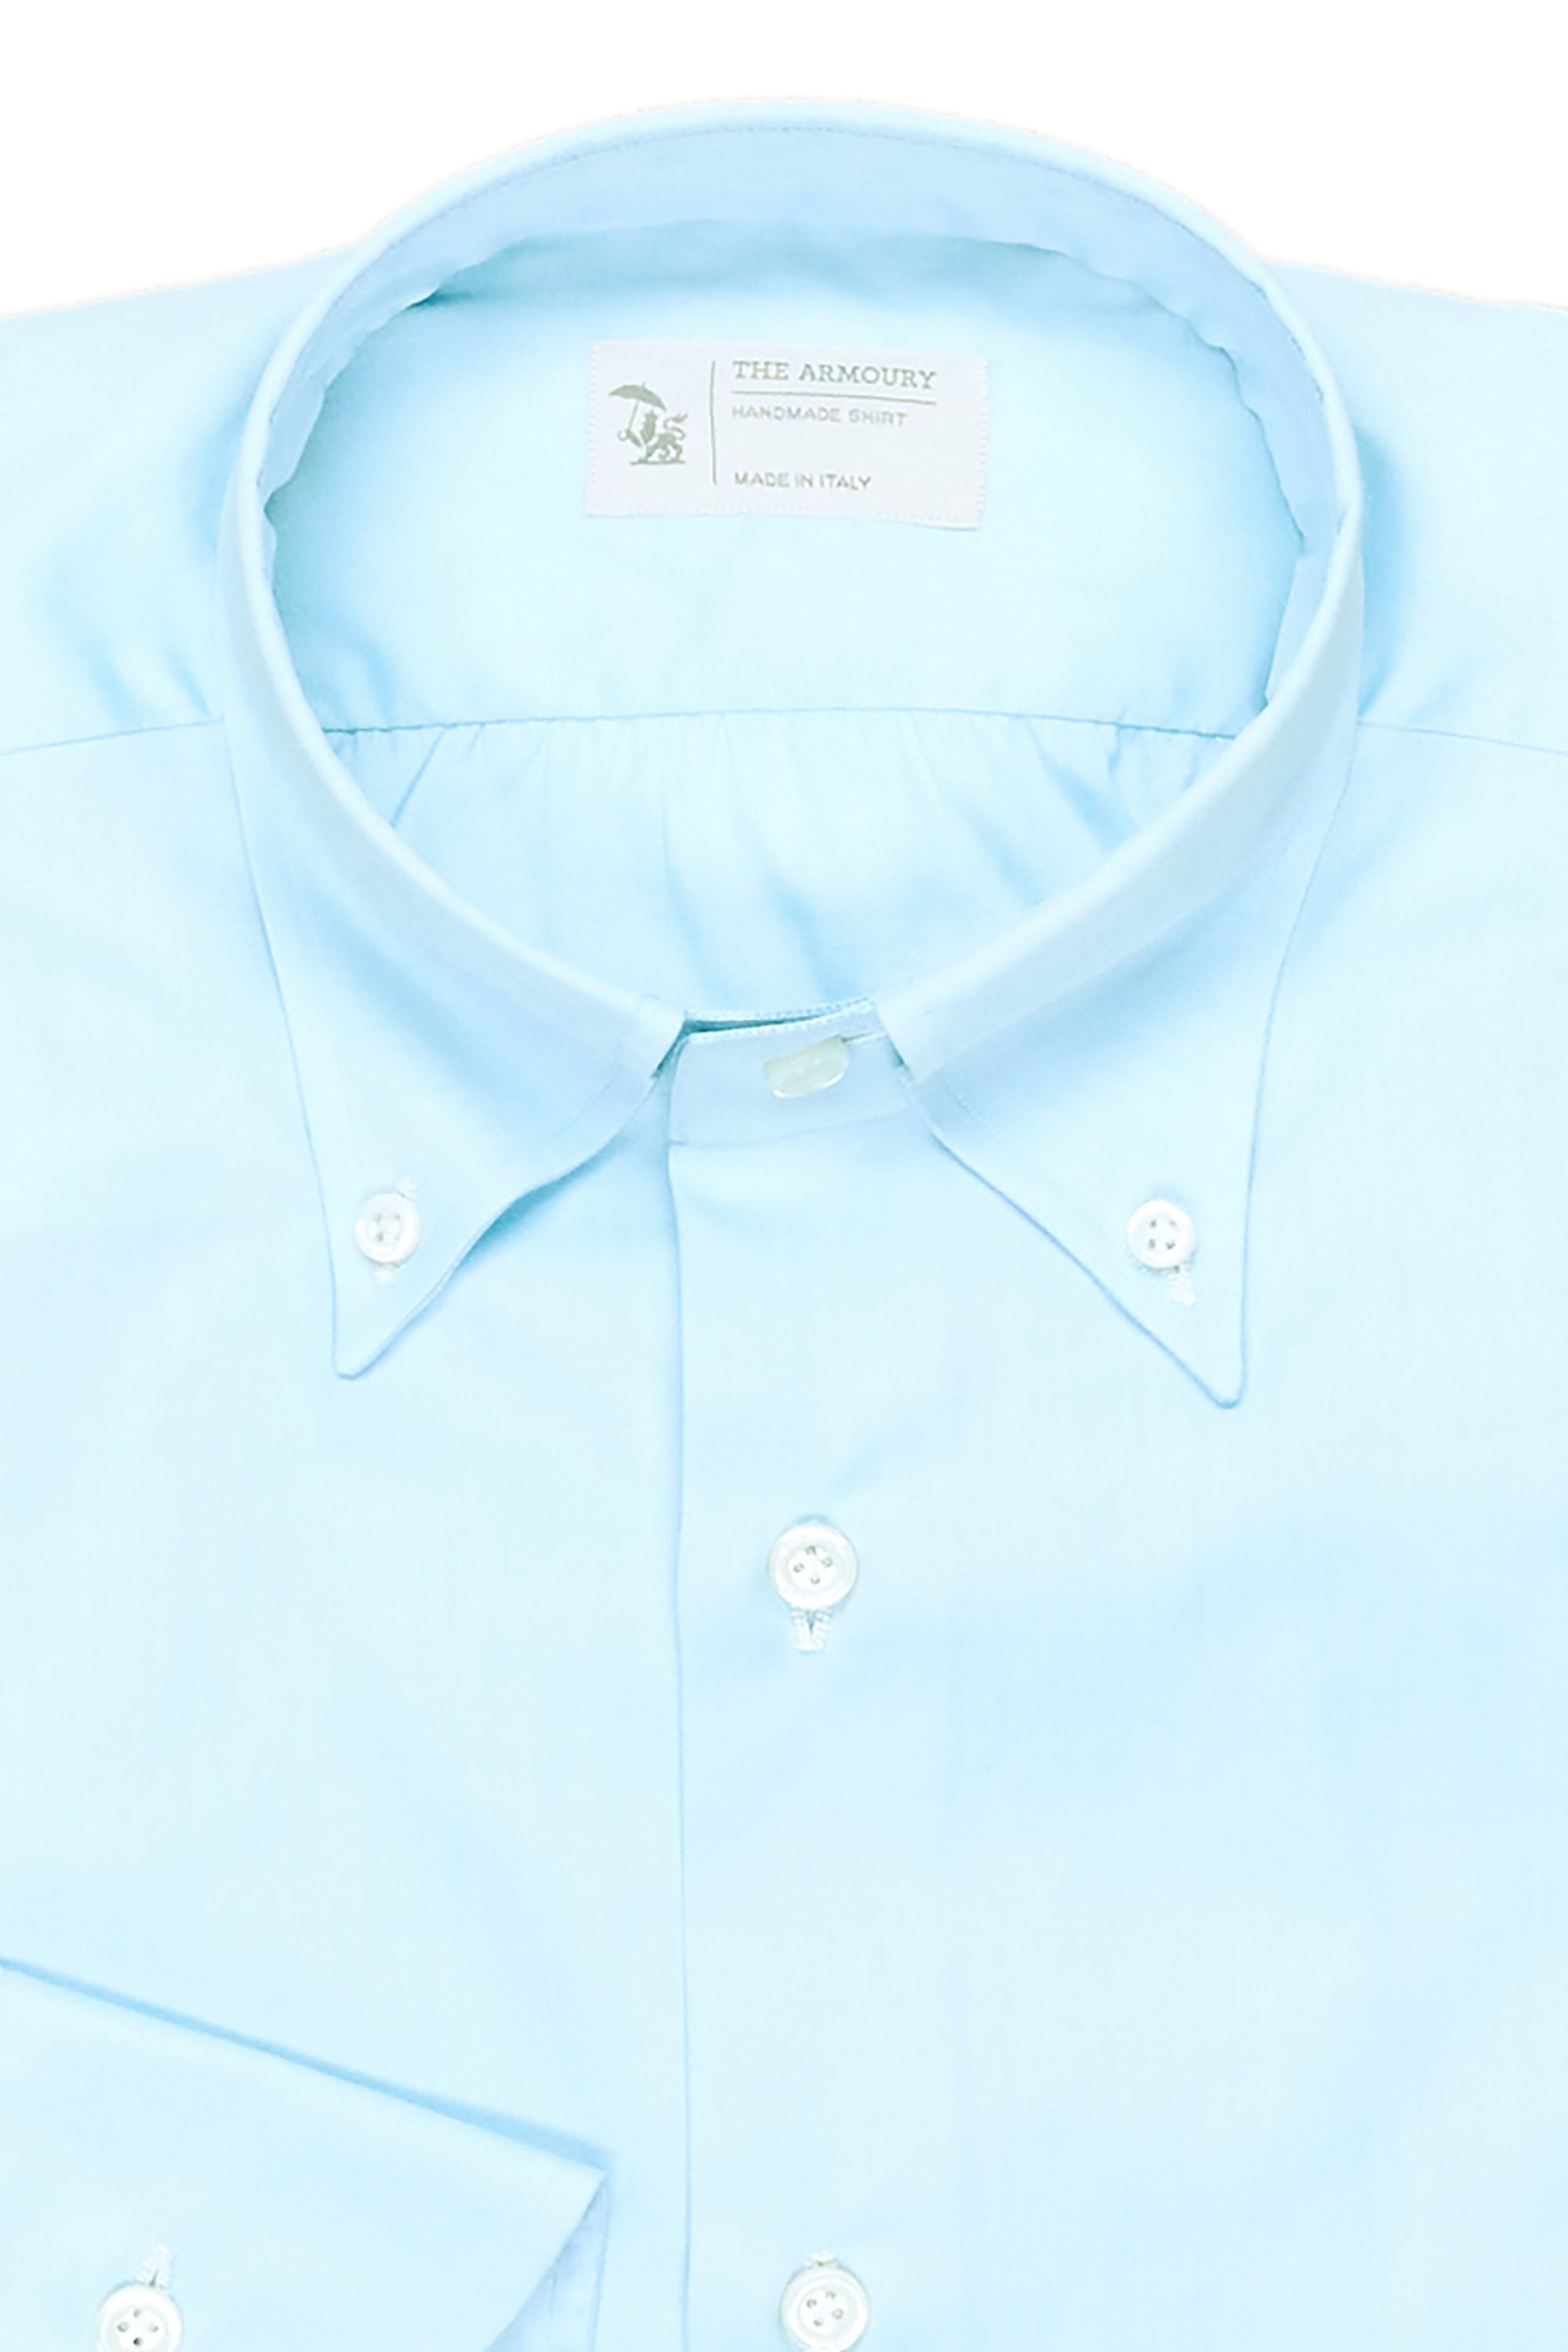 The Armoury Teal Blue Cotton Oxford Button Down Shirt